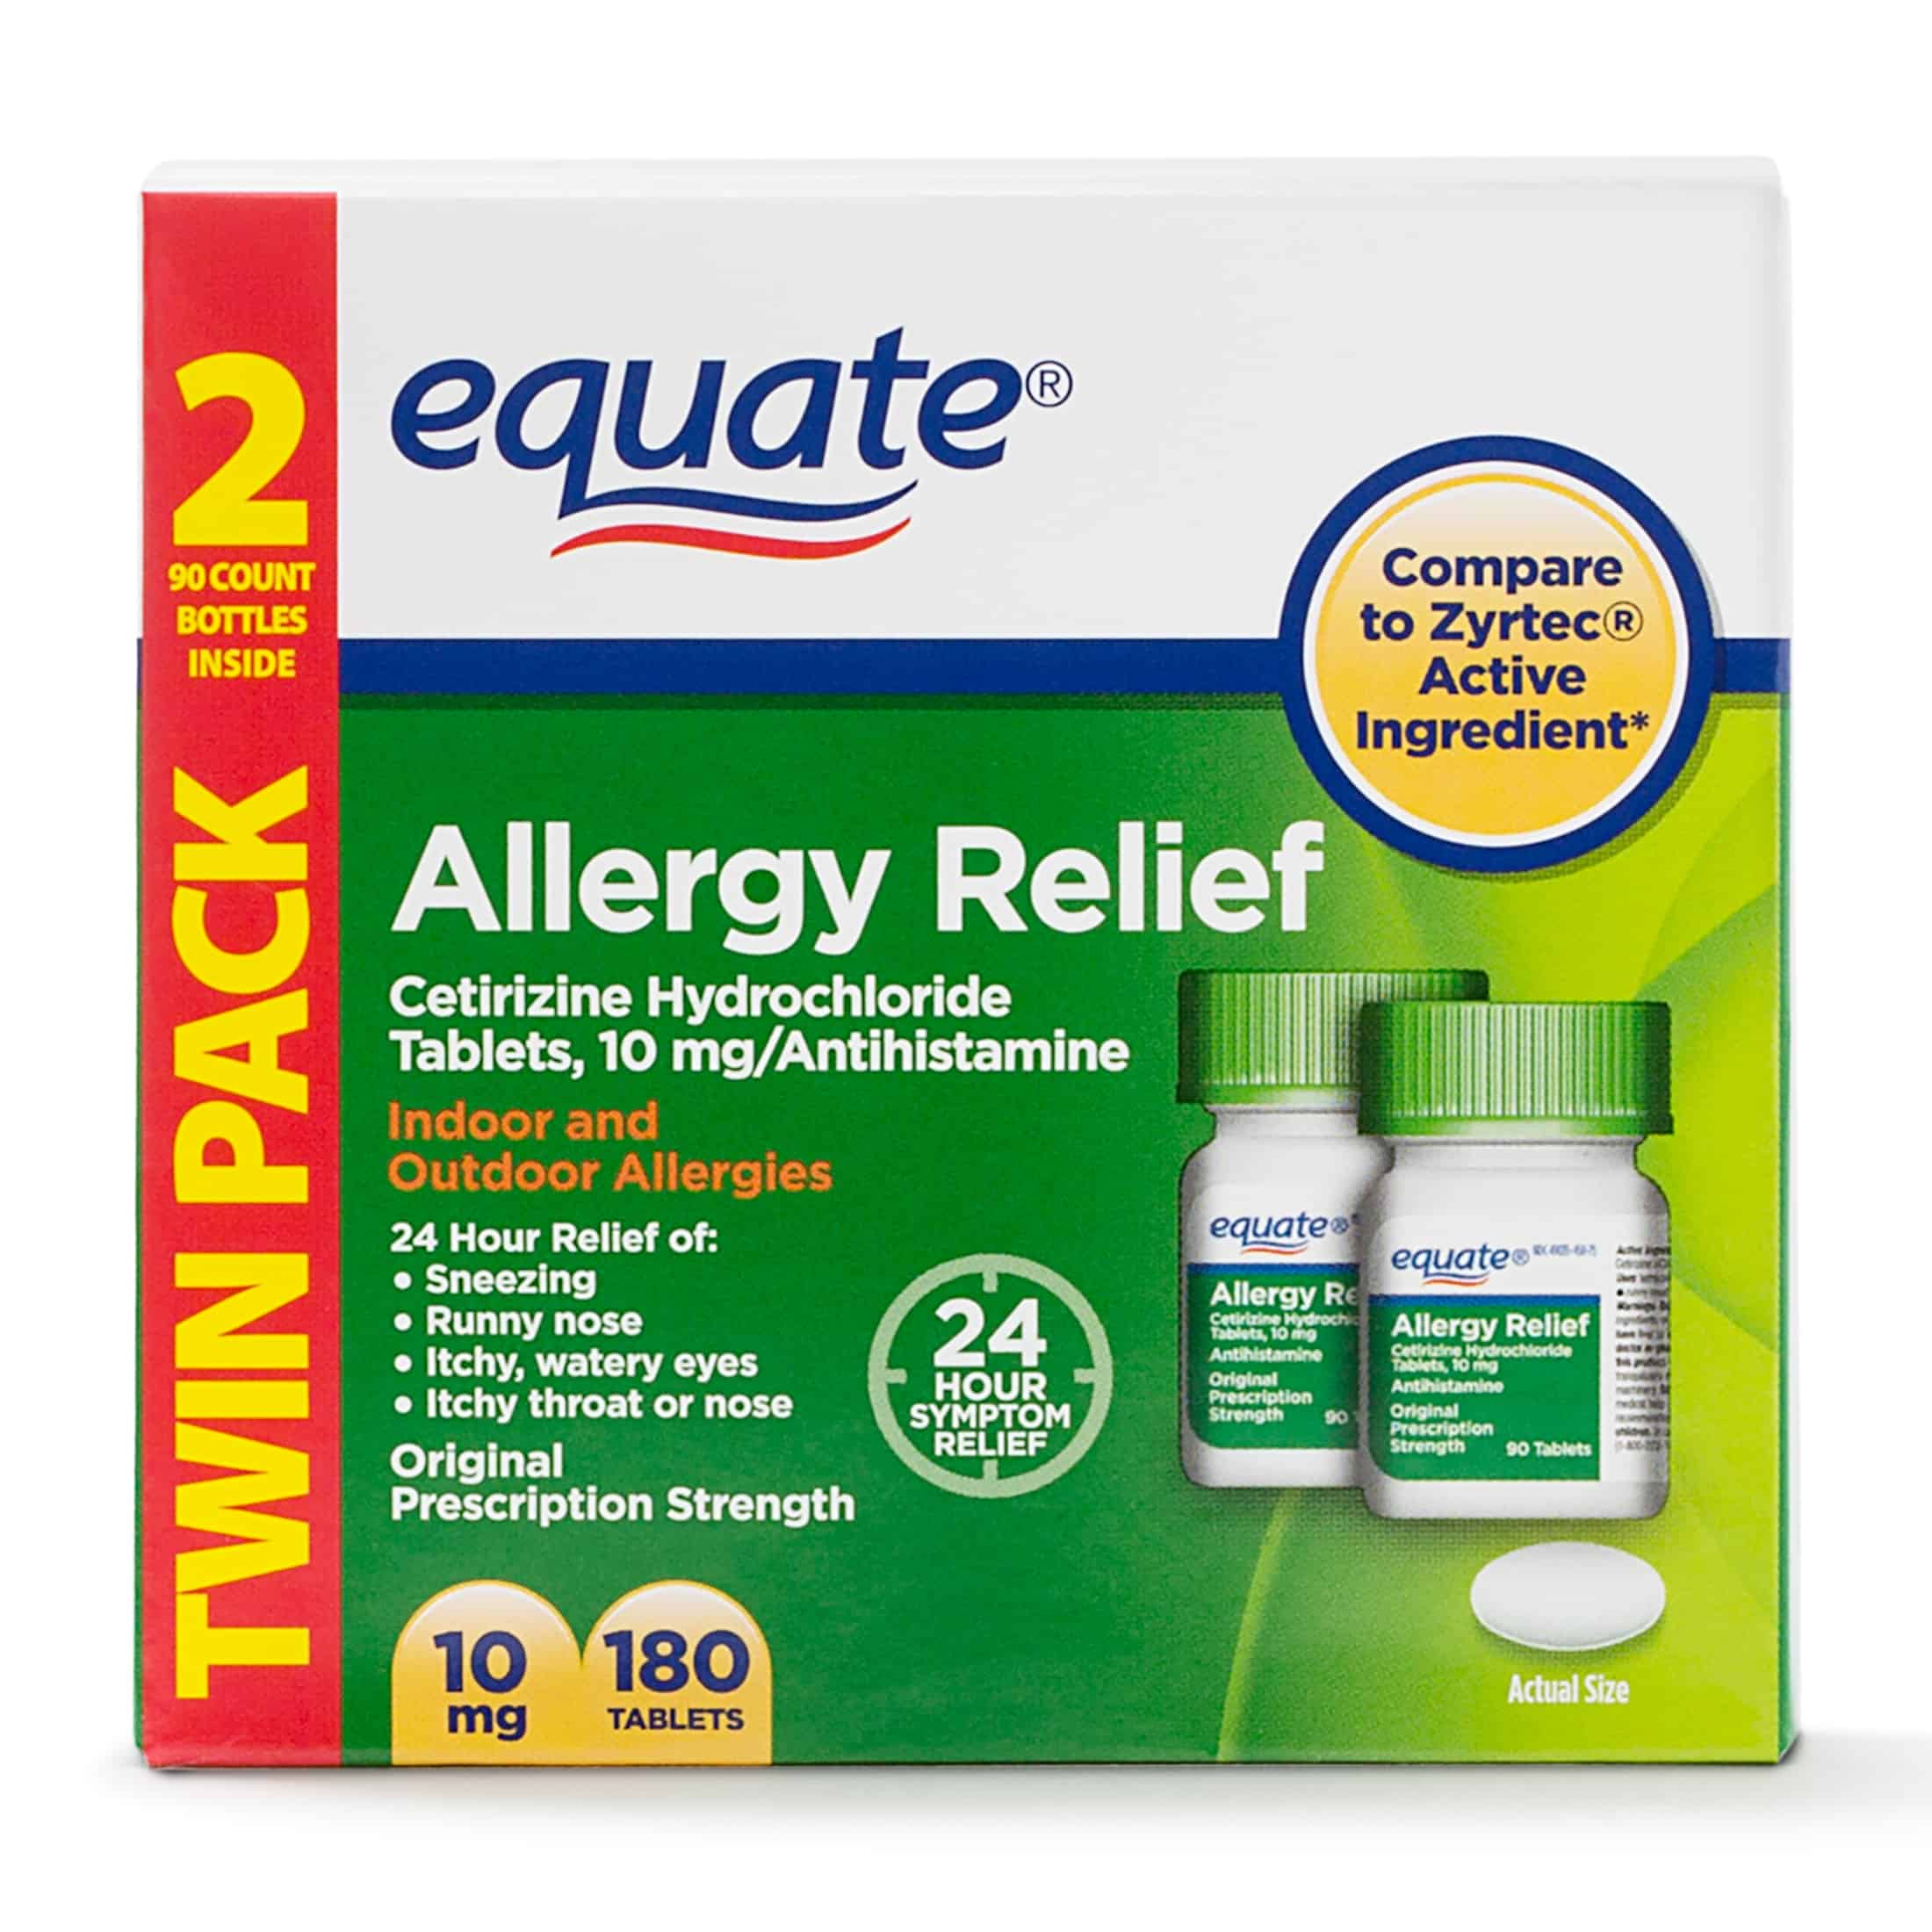 Equate Allergy Relief, Cetirizine Hydrochloride Tablets, 10 mg, 90 ...